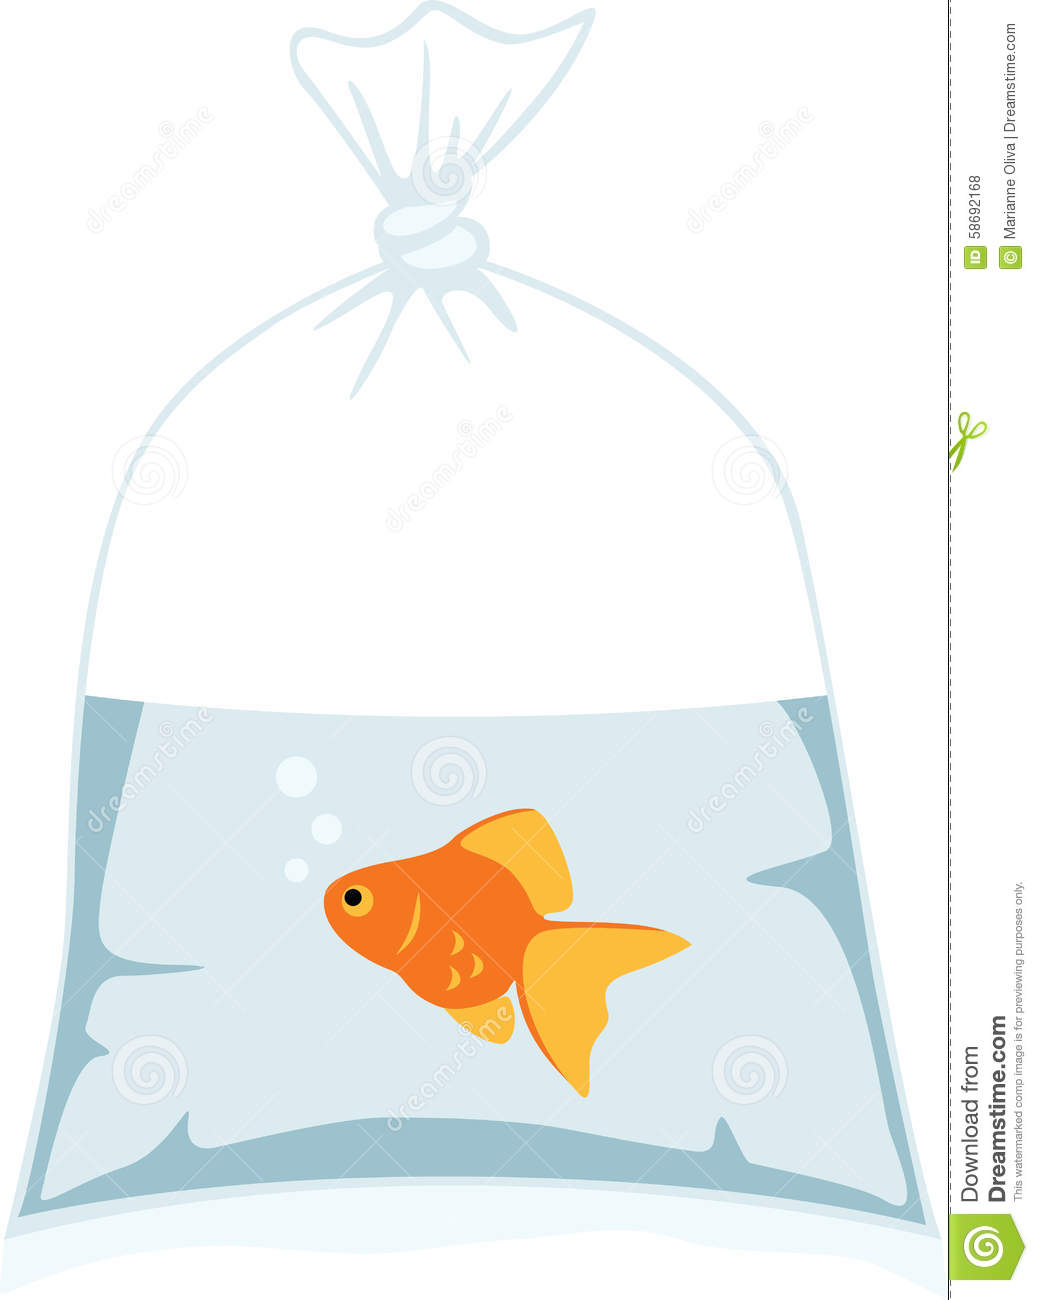 How Many Goldfish Are in a 6.6-Oz Goldfish Bag